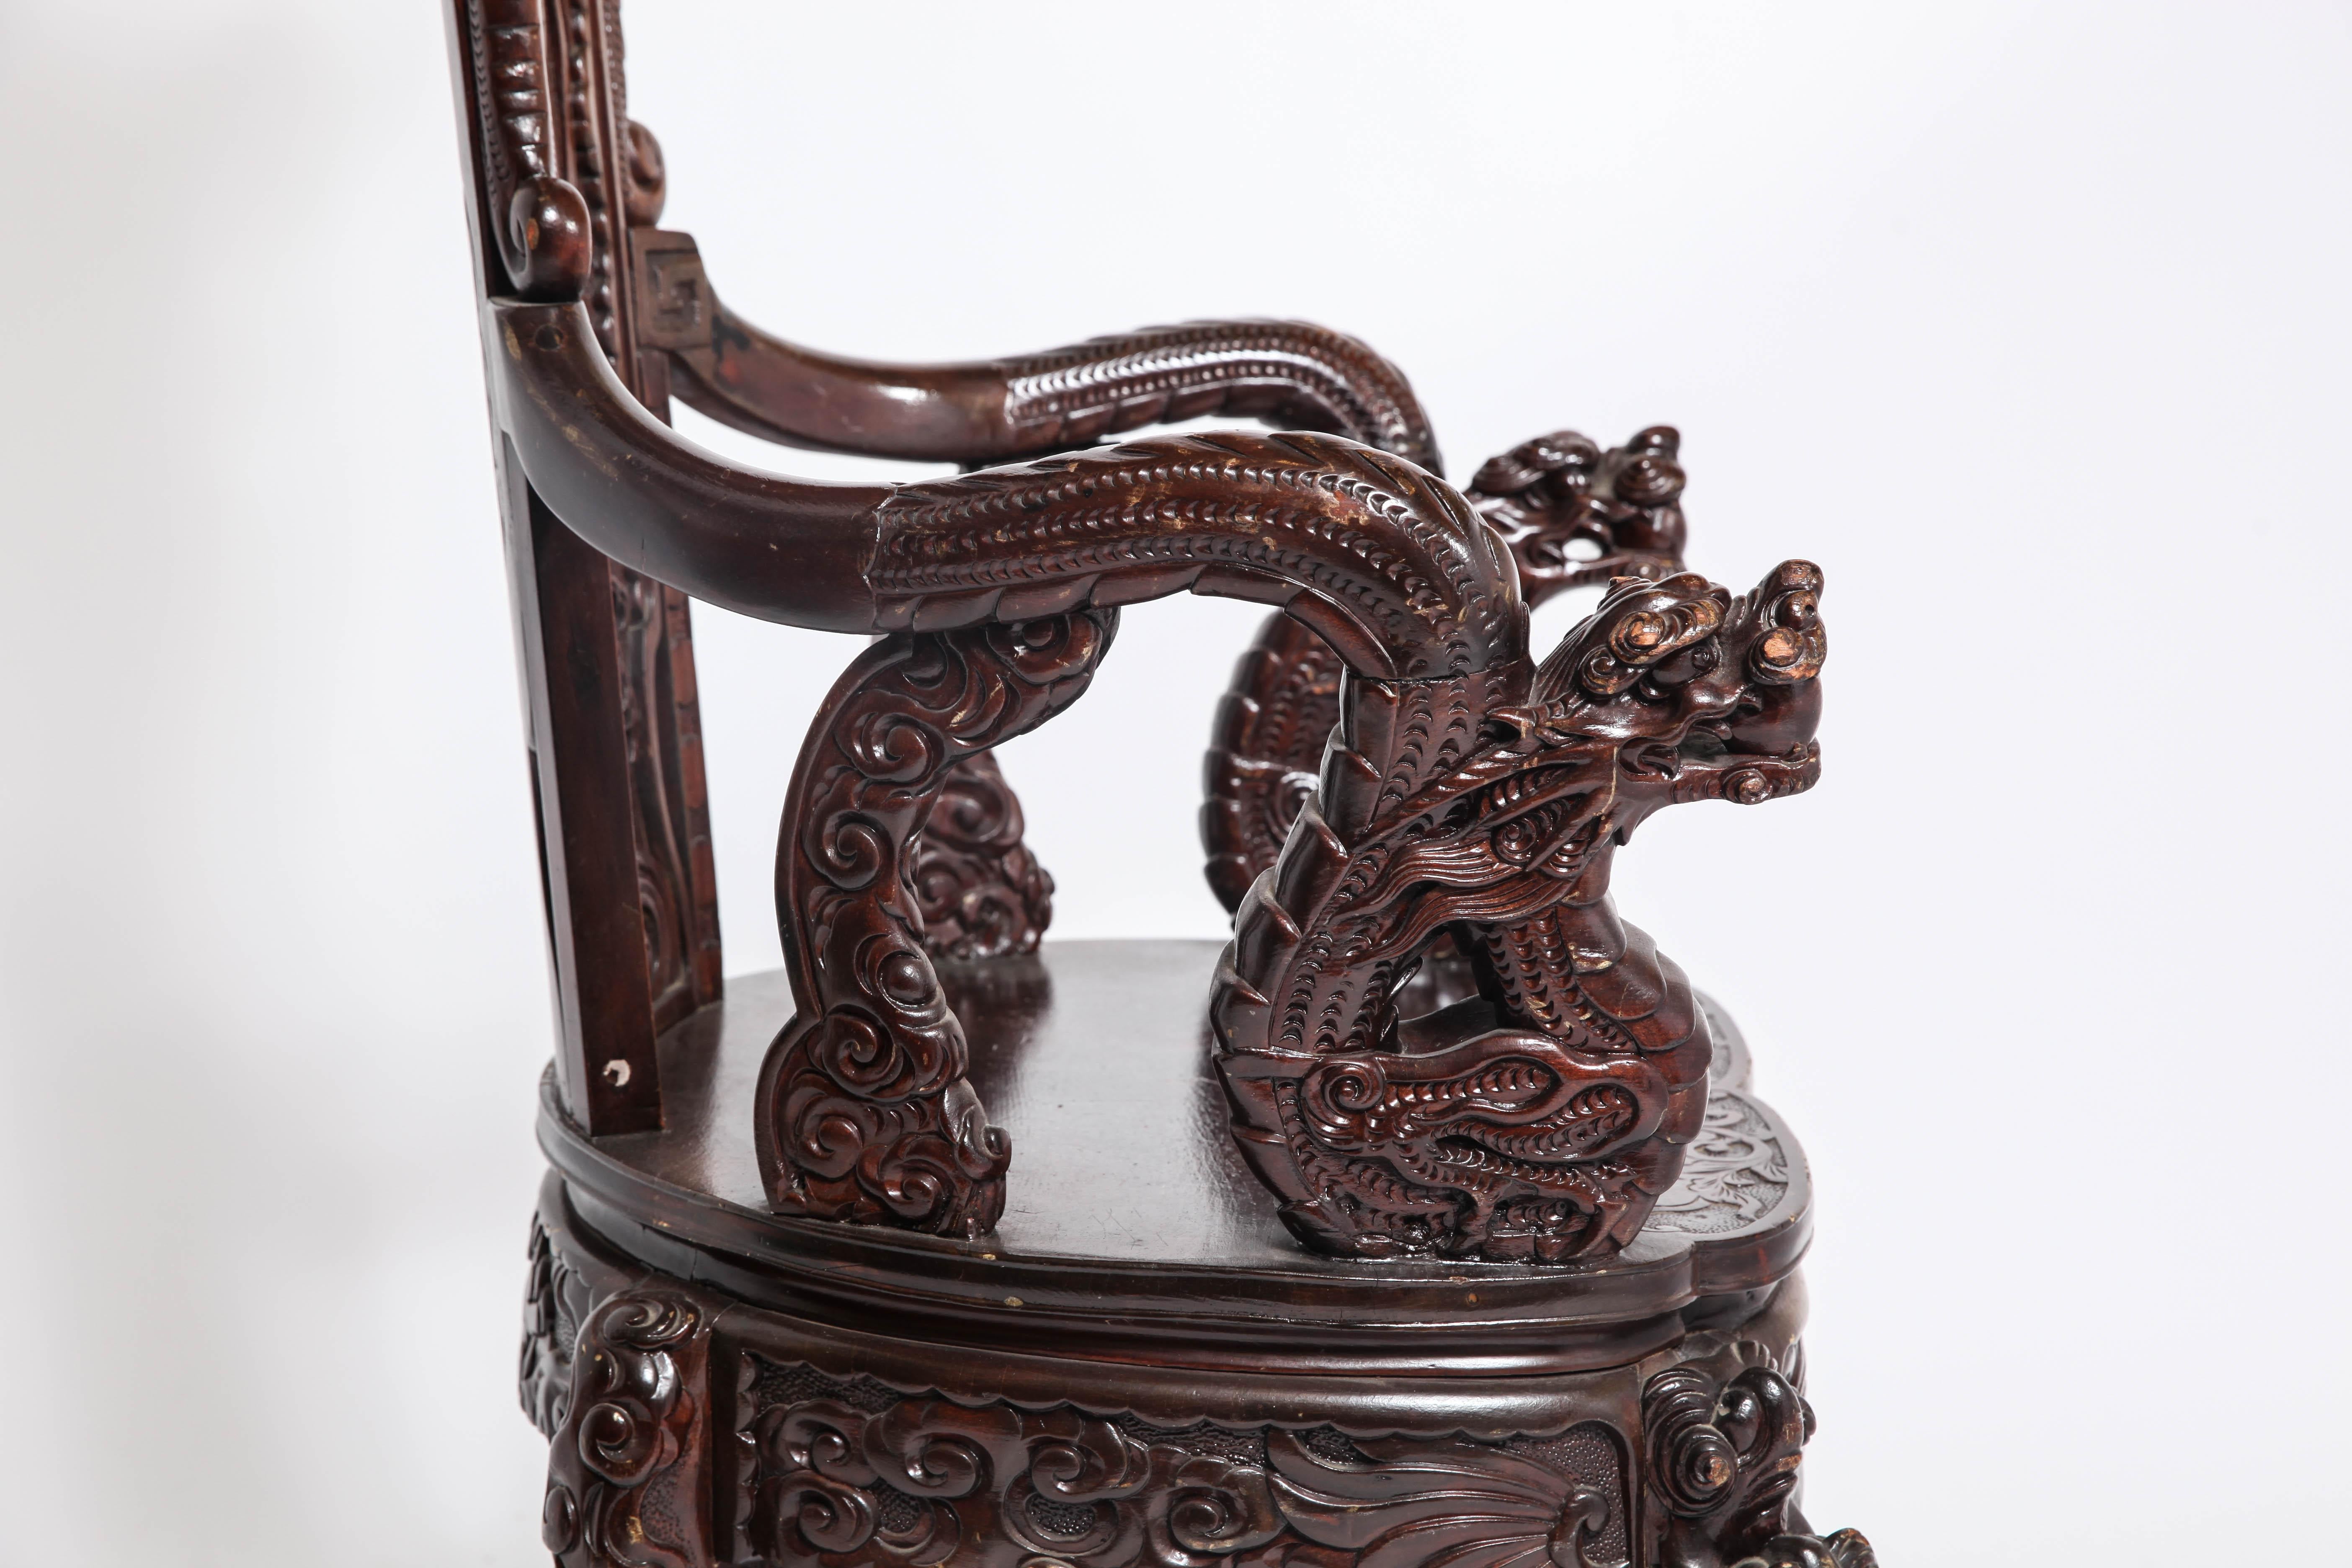 20th Century Art Nouveau Style Japanese High-Back Dragon and Phoenix Armchair in Carved Wood